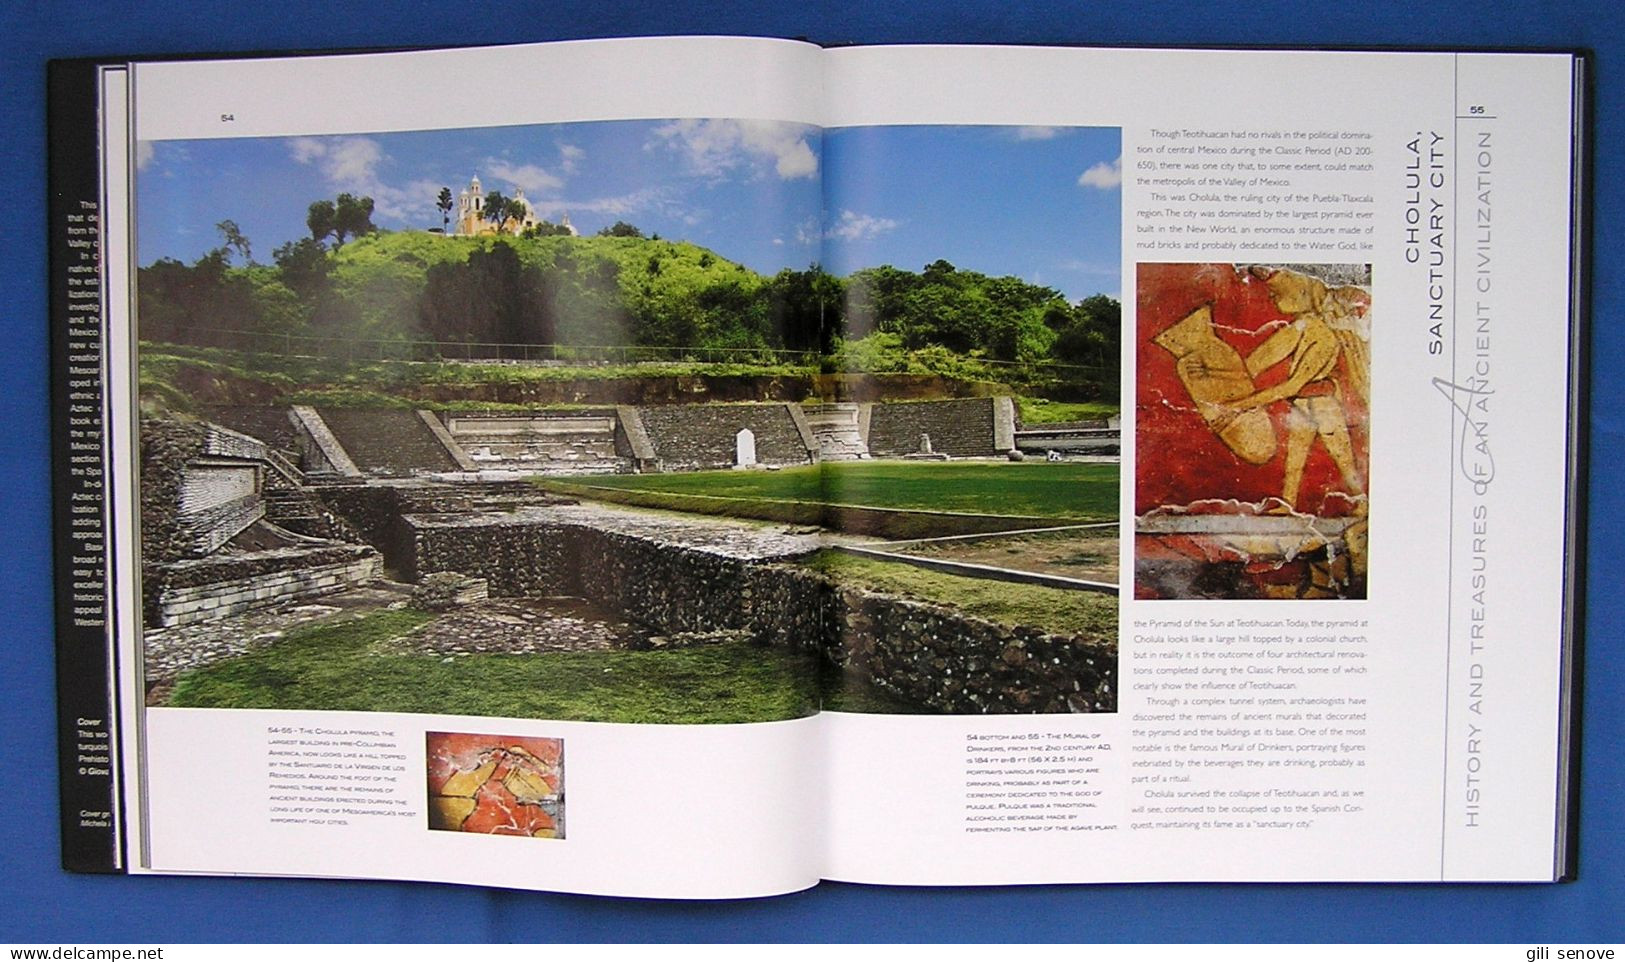 The Aztecs: History And Treasures Of An Ancient Civilization 2007 - Belle-Arti